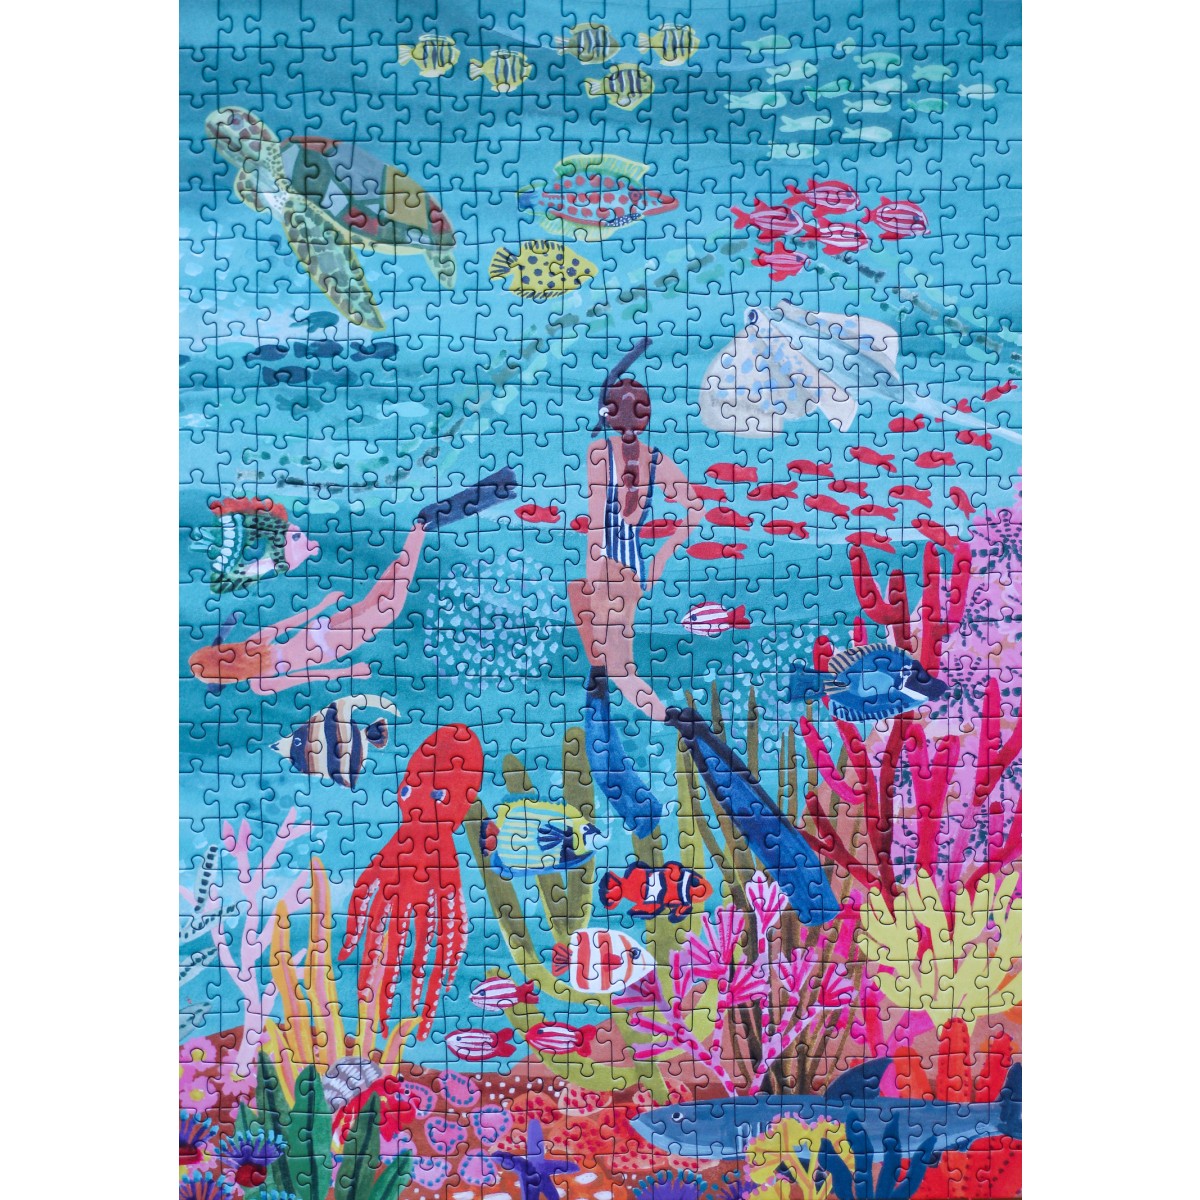 Piecely Under The Sea Puzzle, 1000 Teile